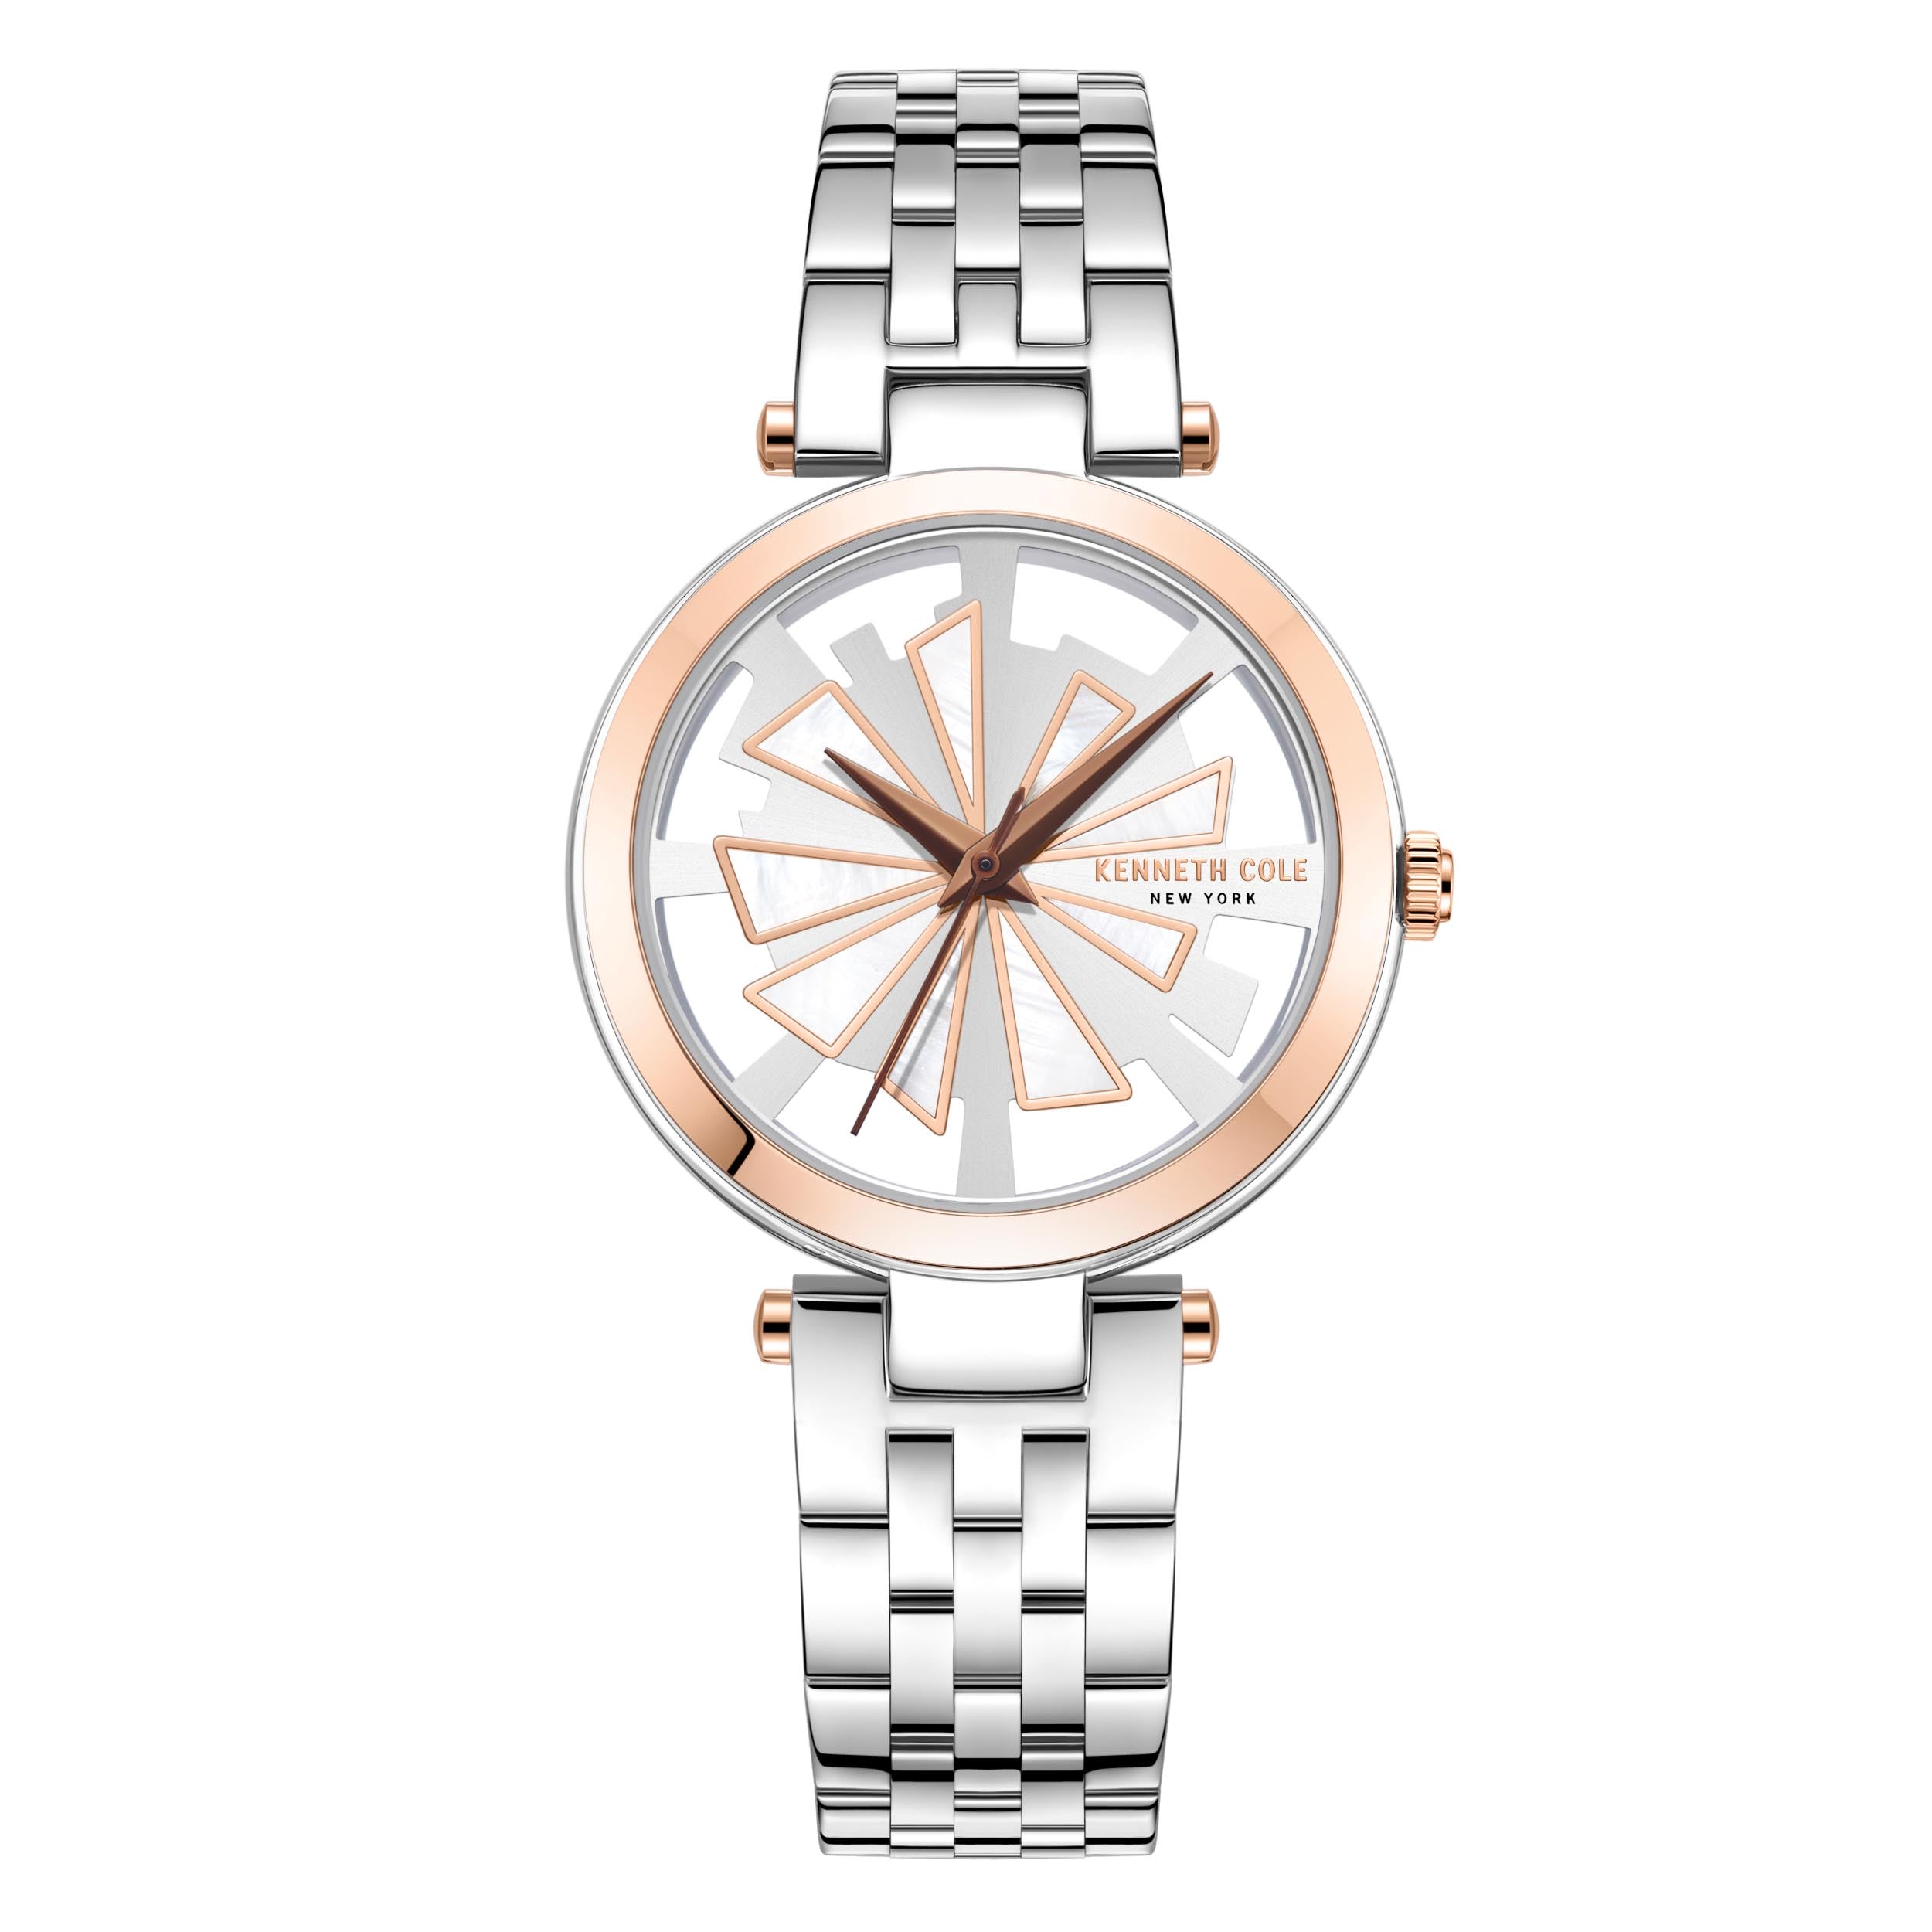 Kenneth Cole New York -KCWLG2222901- Stainless Steel Wrist Watch for Women - Silver & Rose Gold